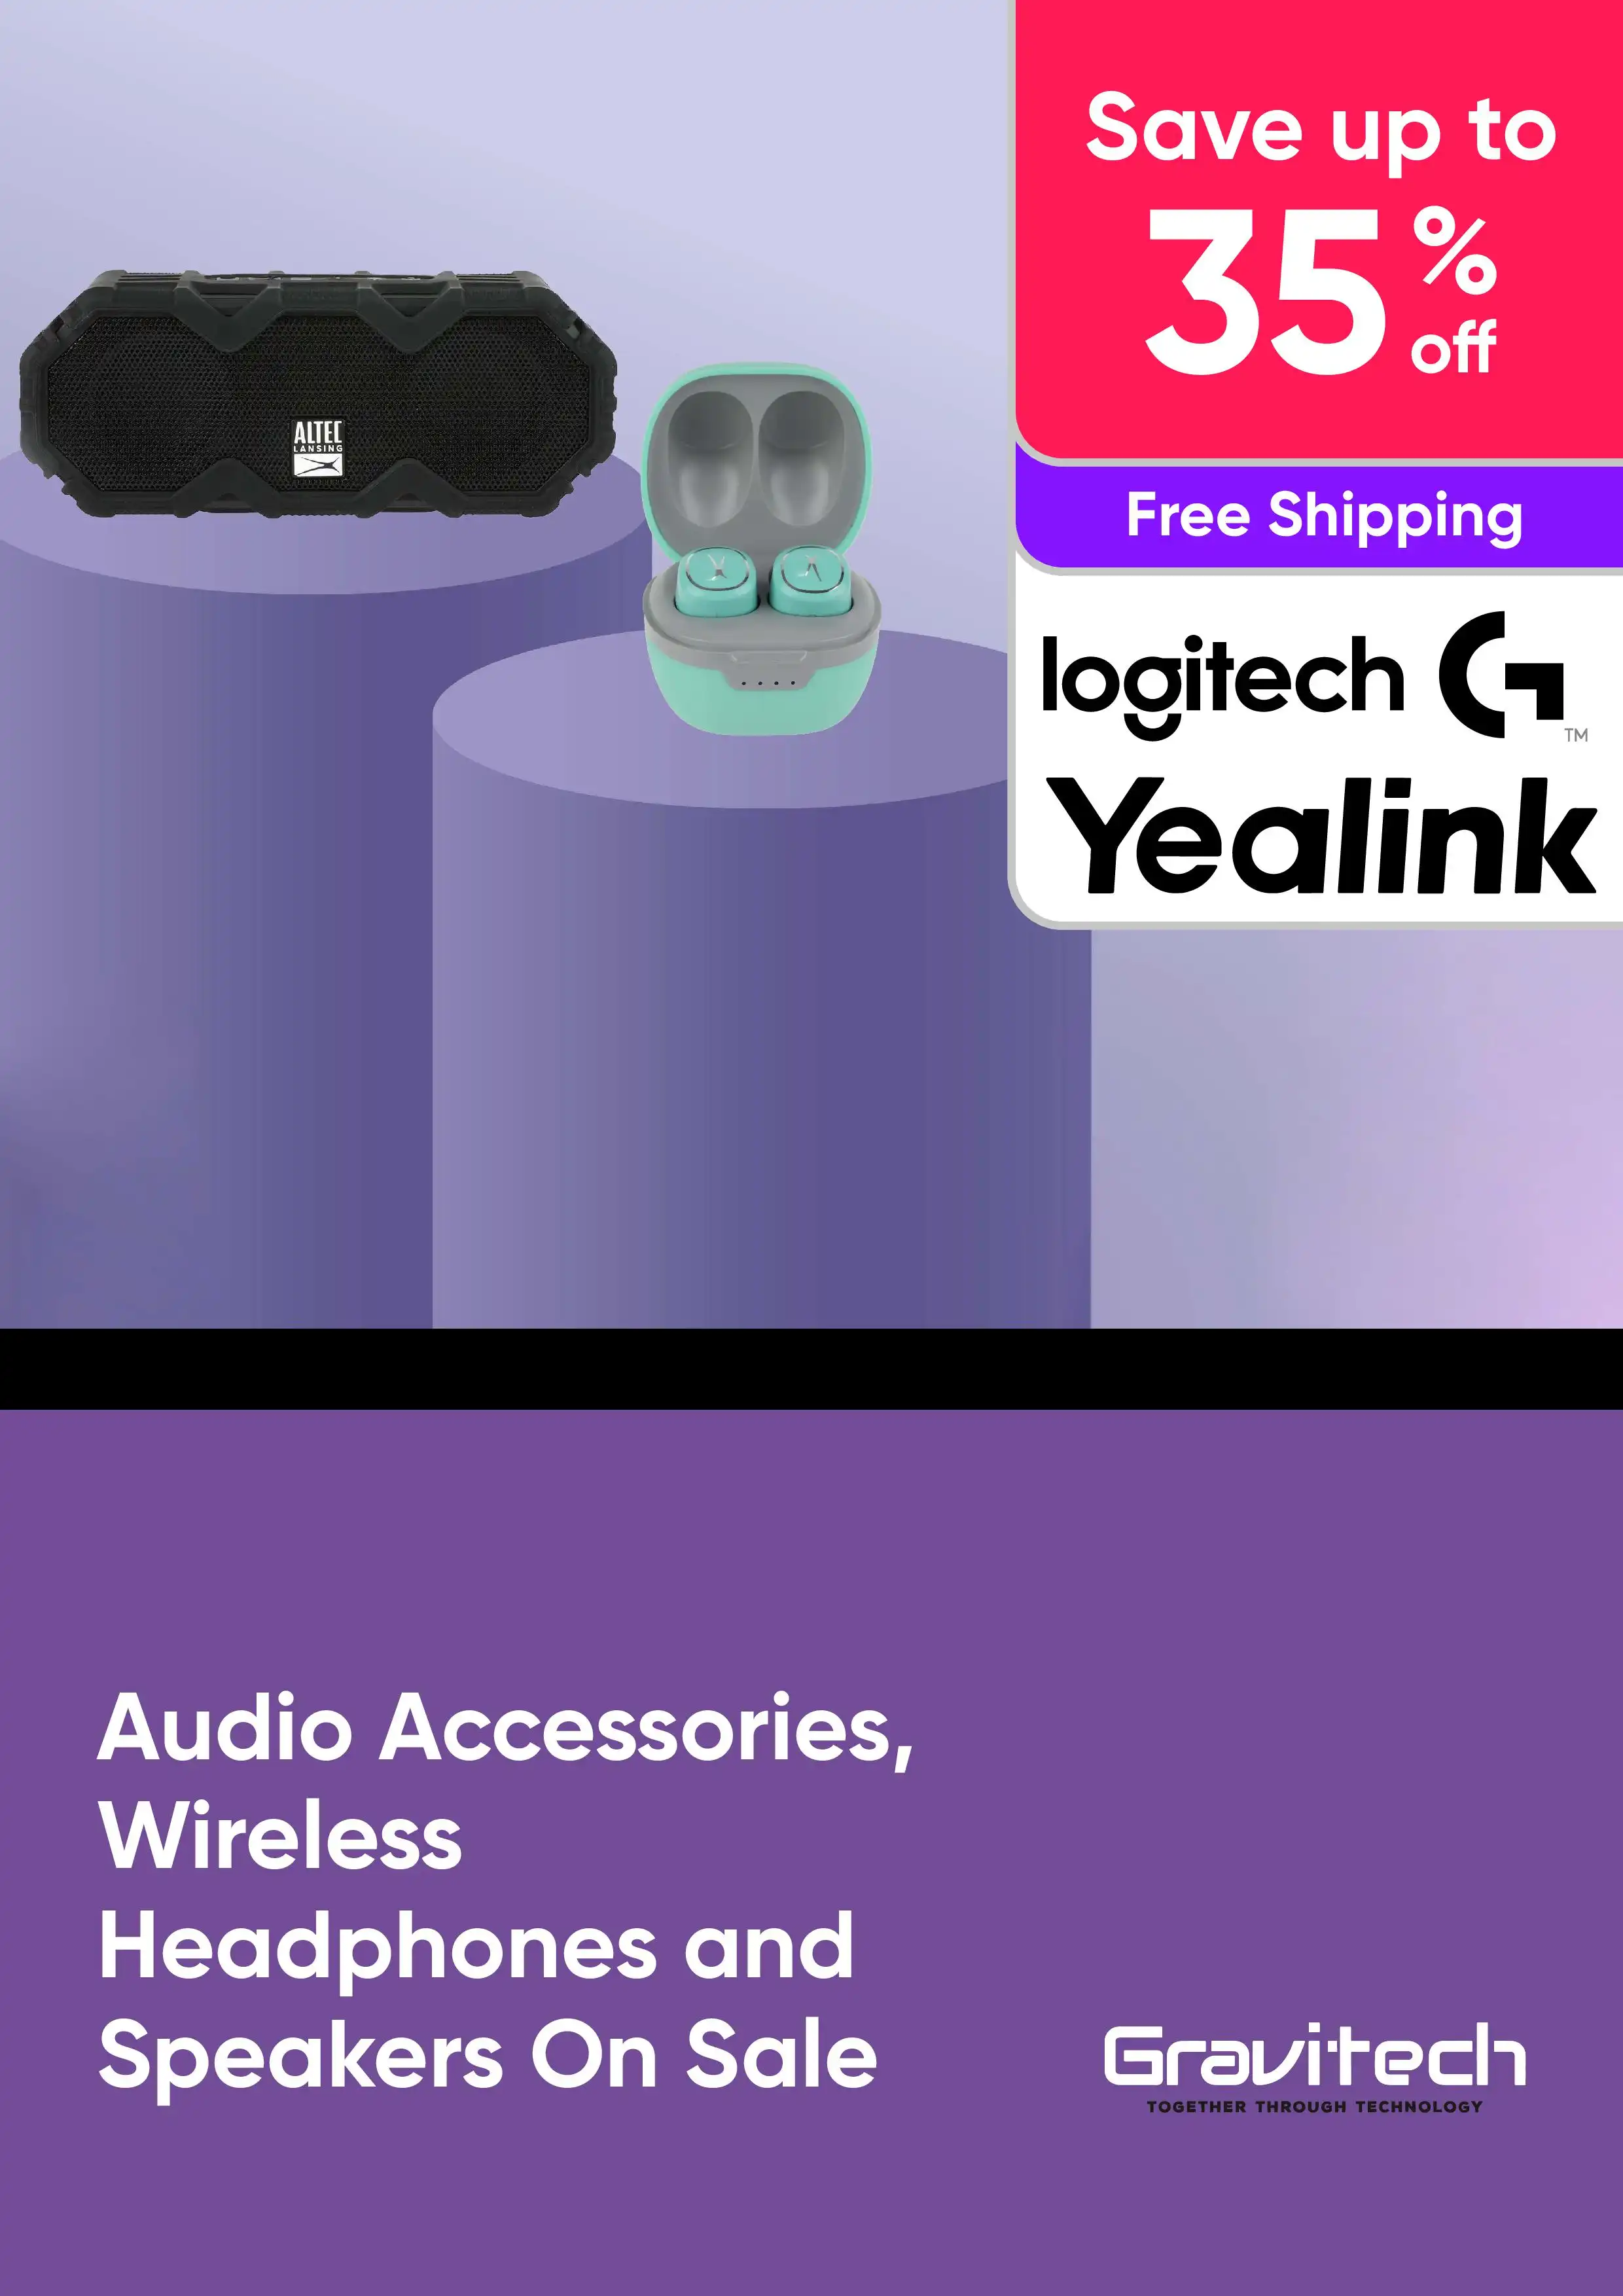 Audio Accessories, Wireless Headphones and Speakers On Sale - Save Up to 35% Off